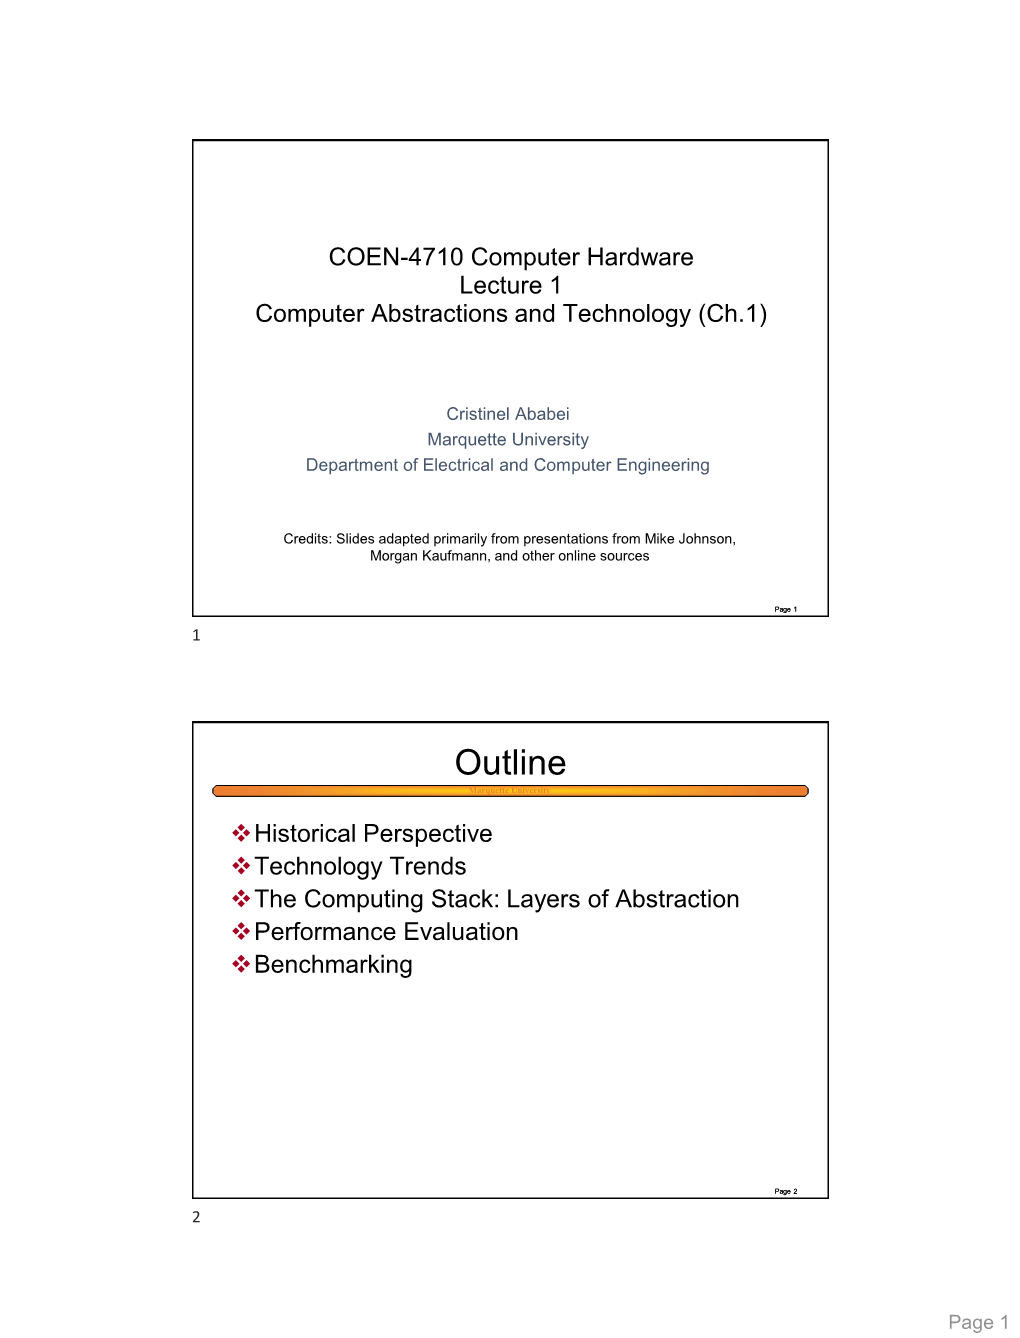 COEN-4710 Computer Hardware Lecture 1 Computer Abstractions and Technology (Ch.1)